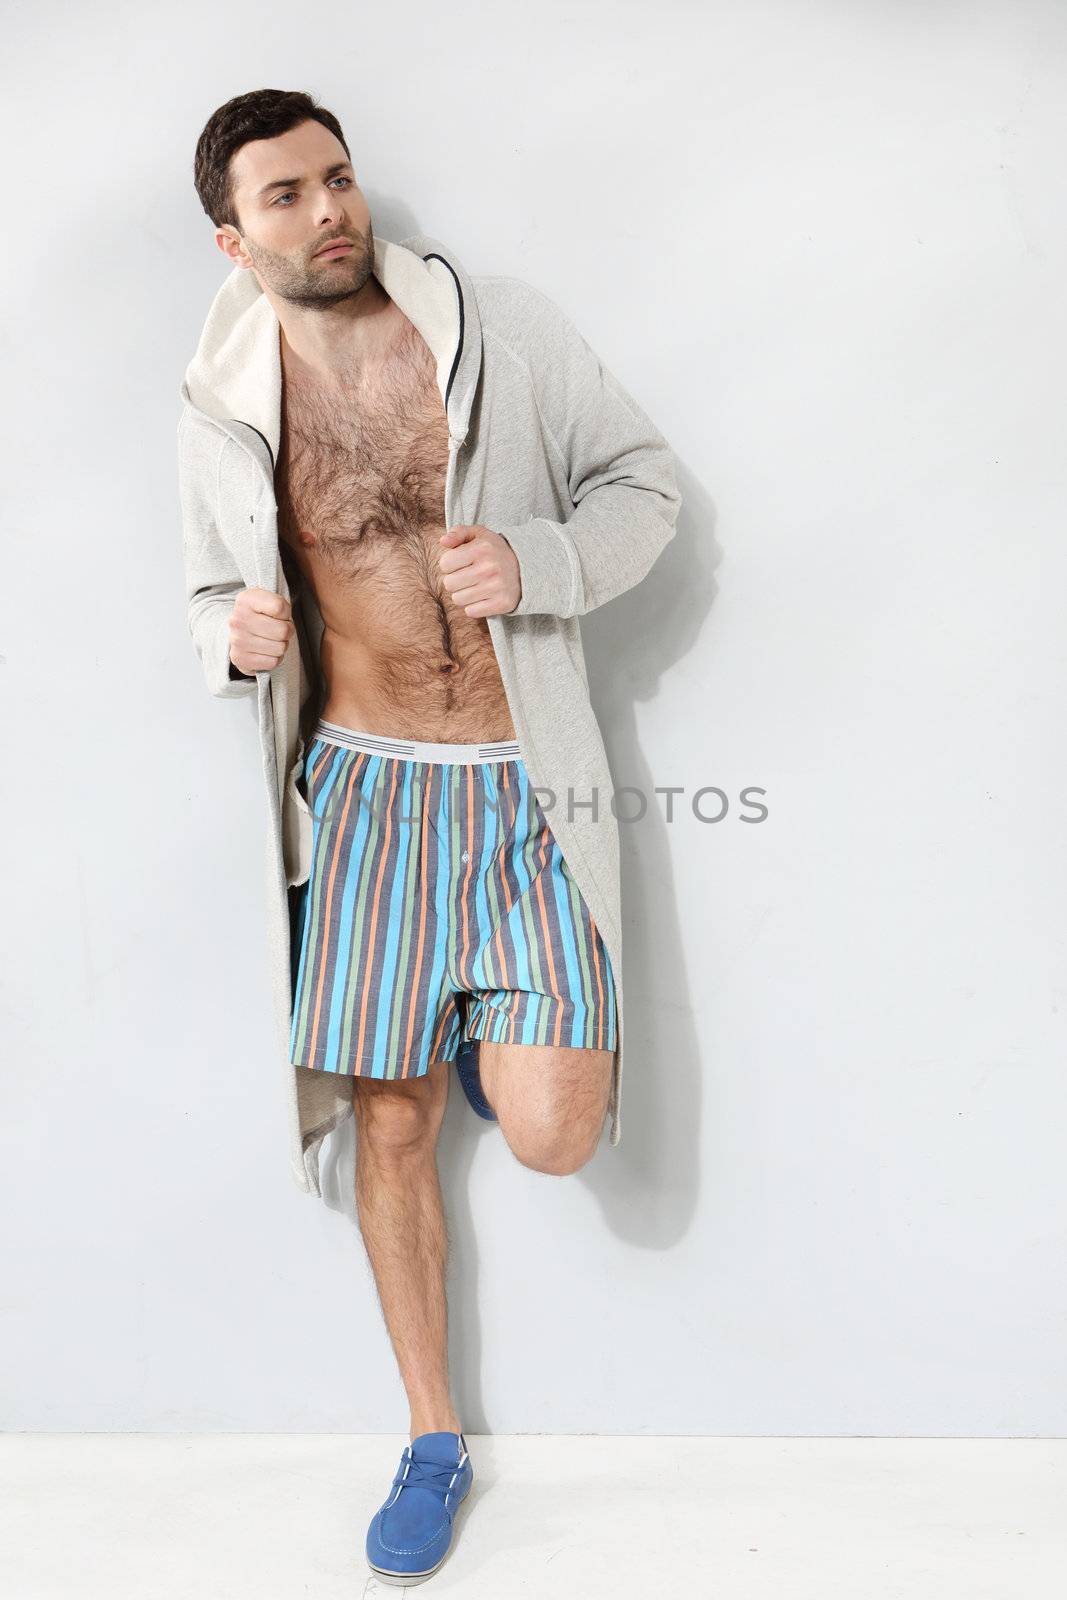 Stylish man in shorts on a gray background